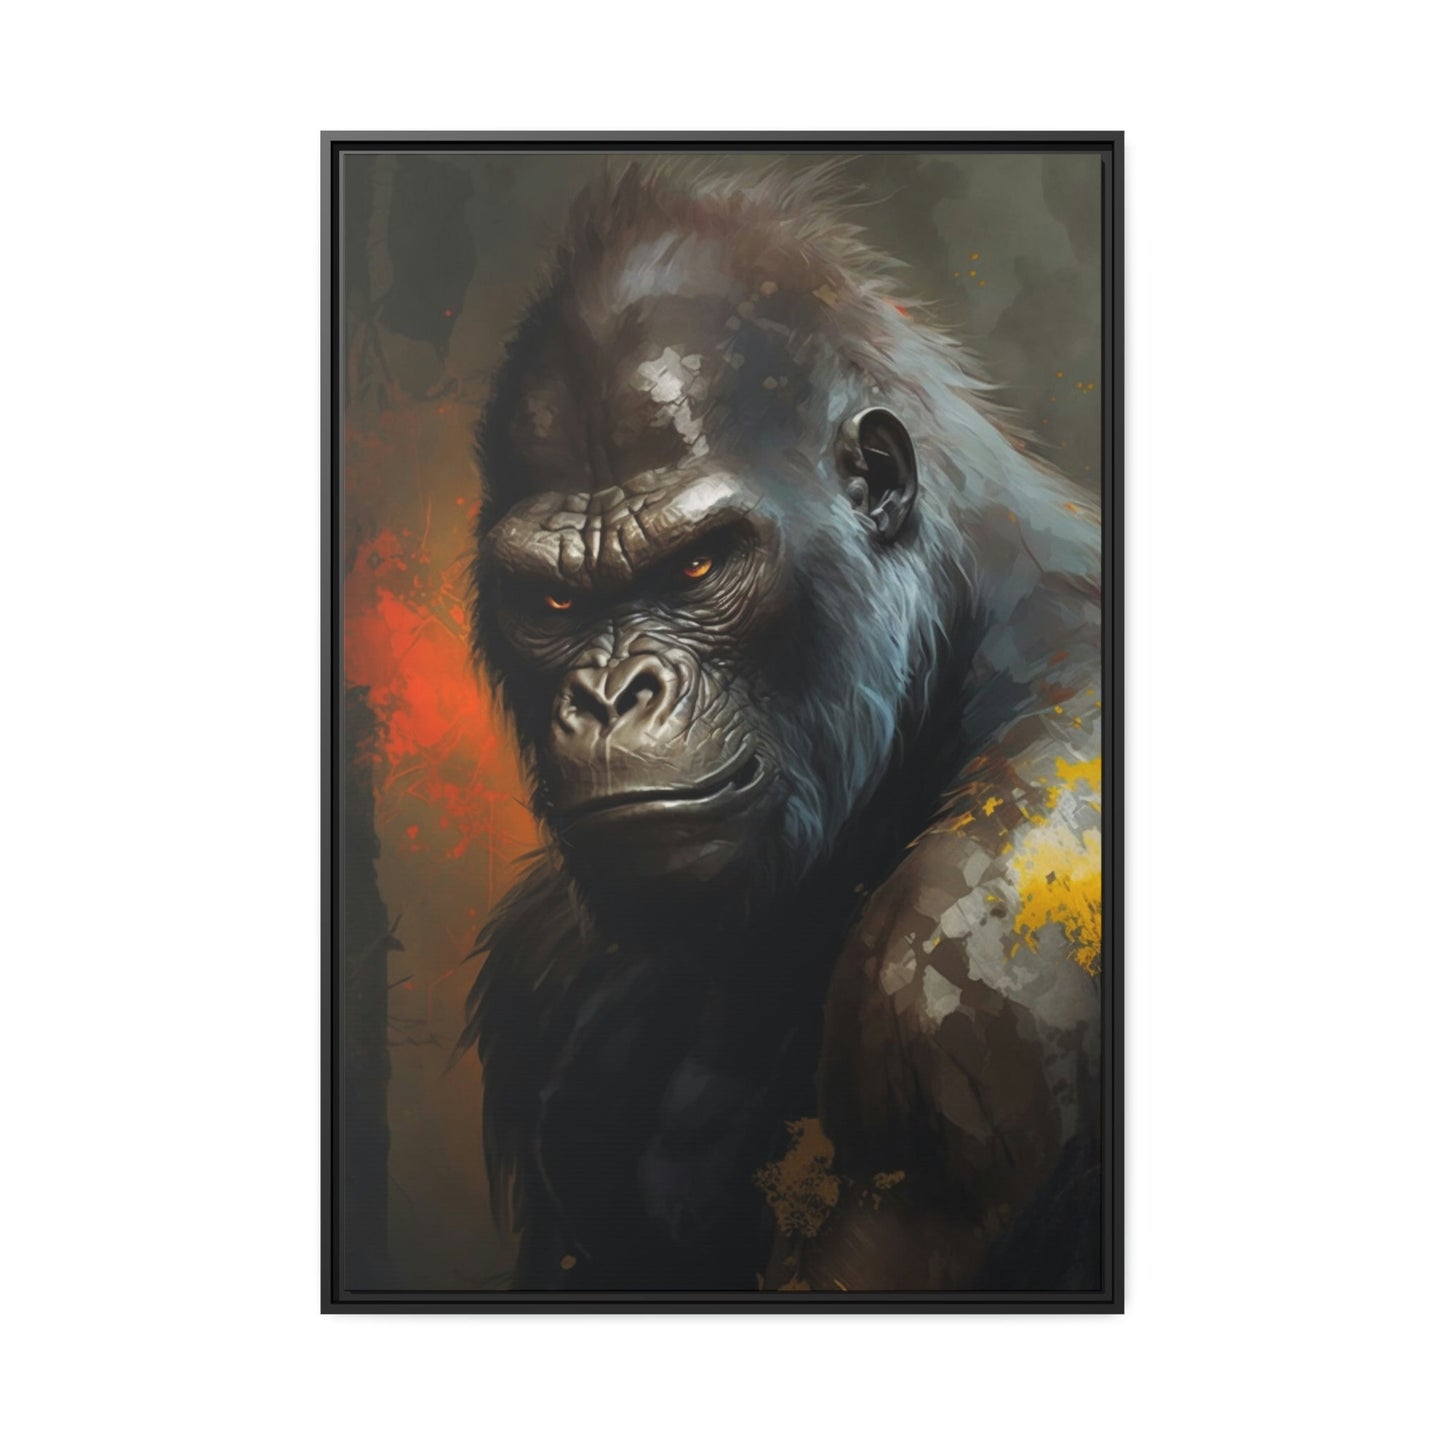 Guardian of the Forest: Canvas Artwork of Gorilla in the Wild